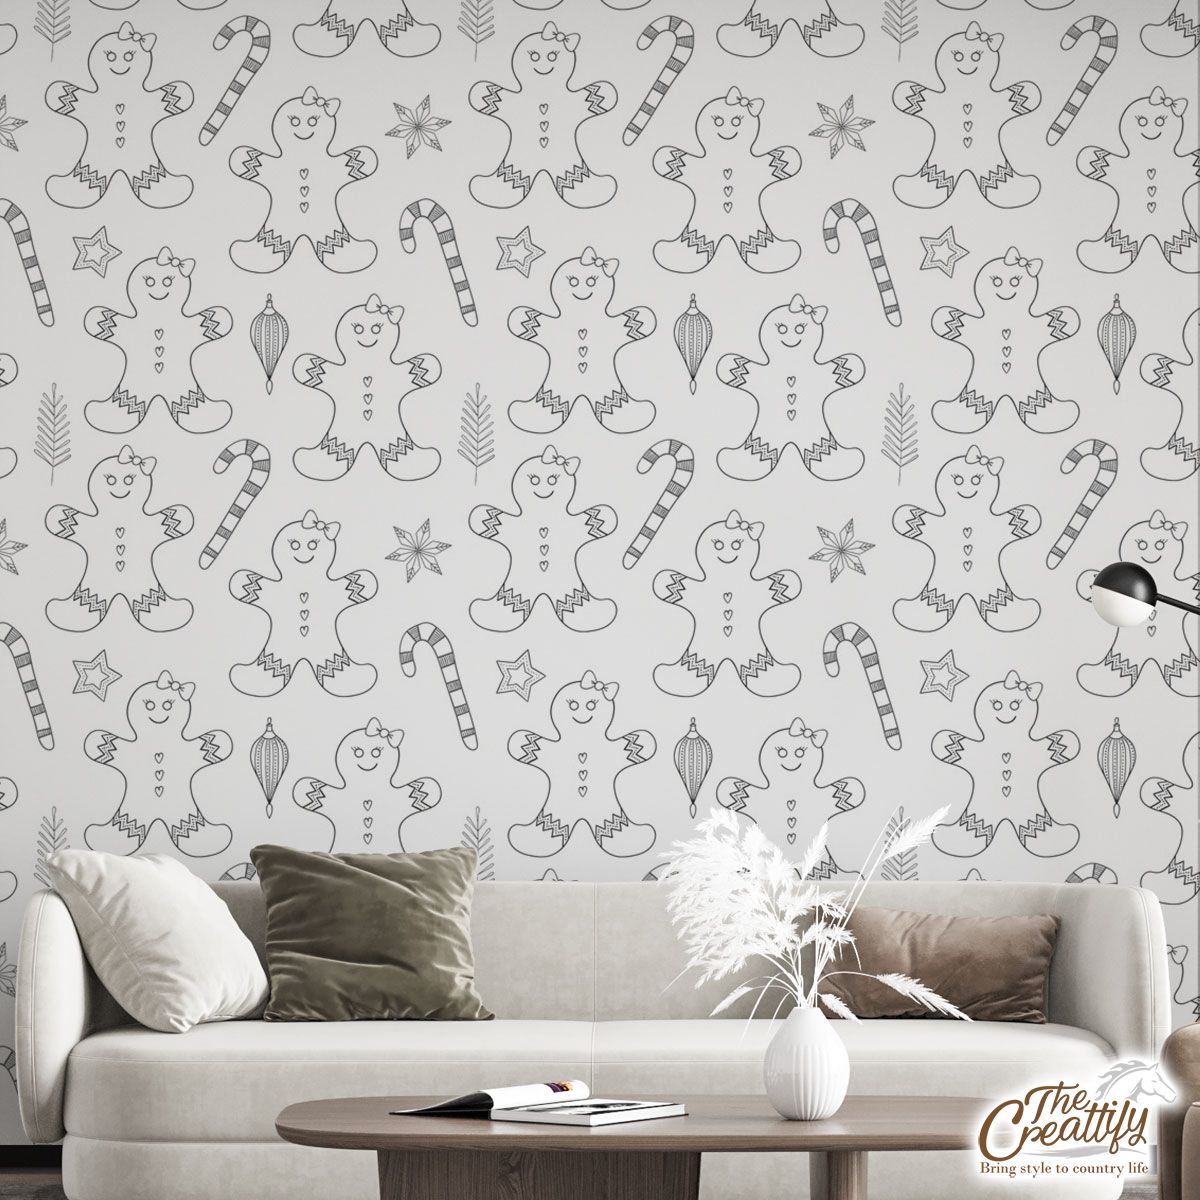 Black And White Gingerbread Man, Candy Cane And Snowflake Wall Mural